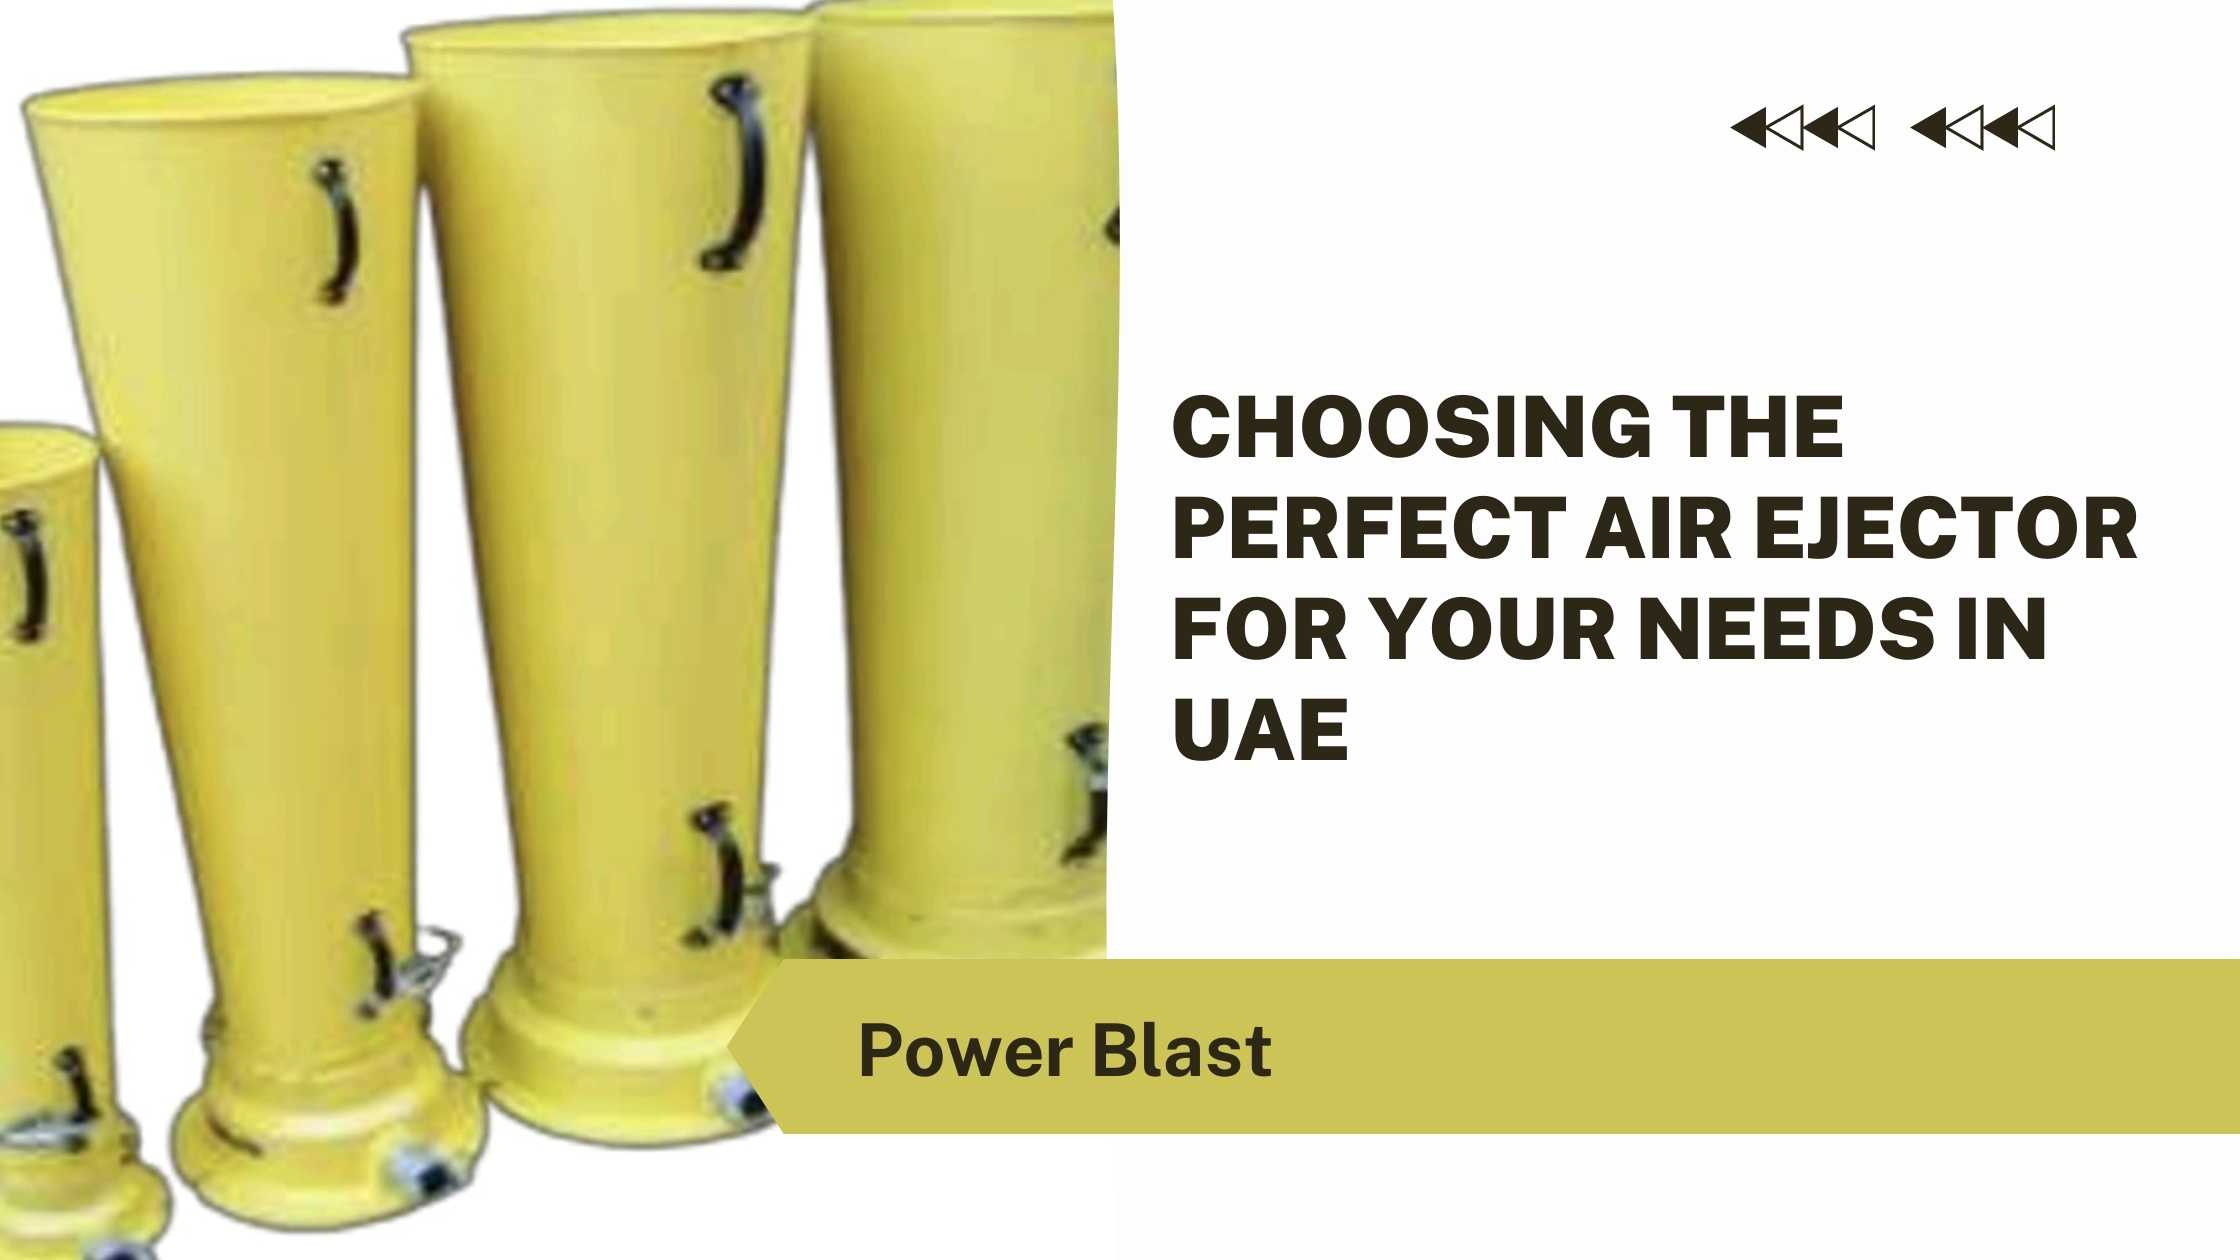 Choosing the Perfect Air Ejector for Your Needs in UAE